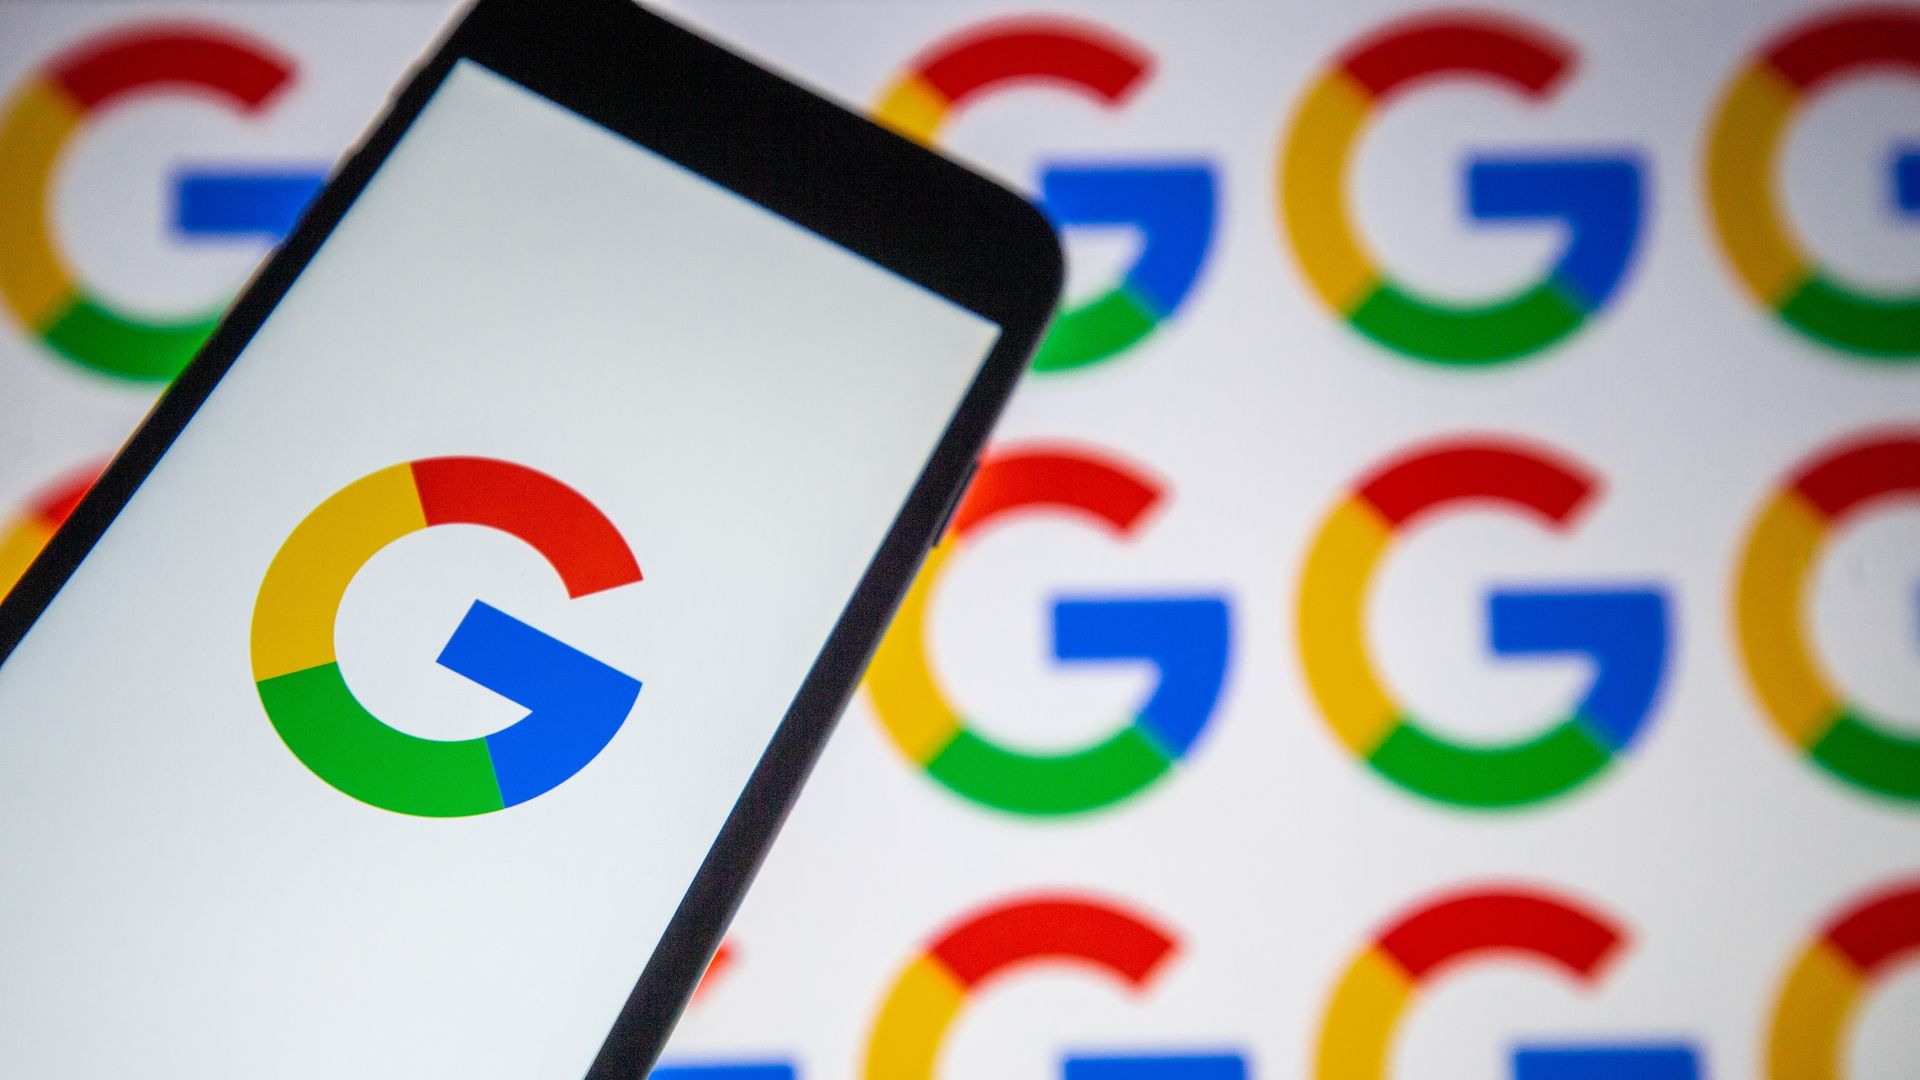 A photo of a smartphone with a Google logo on the screen over images of the Google logo.